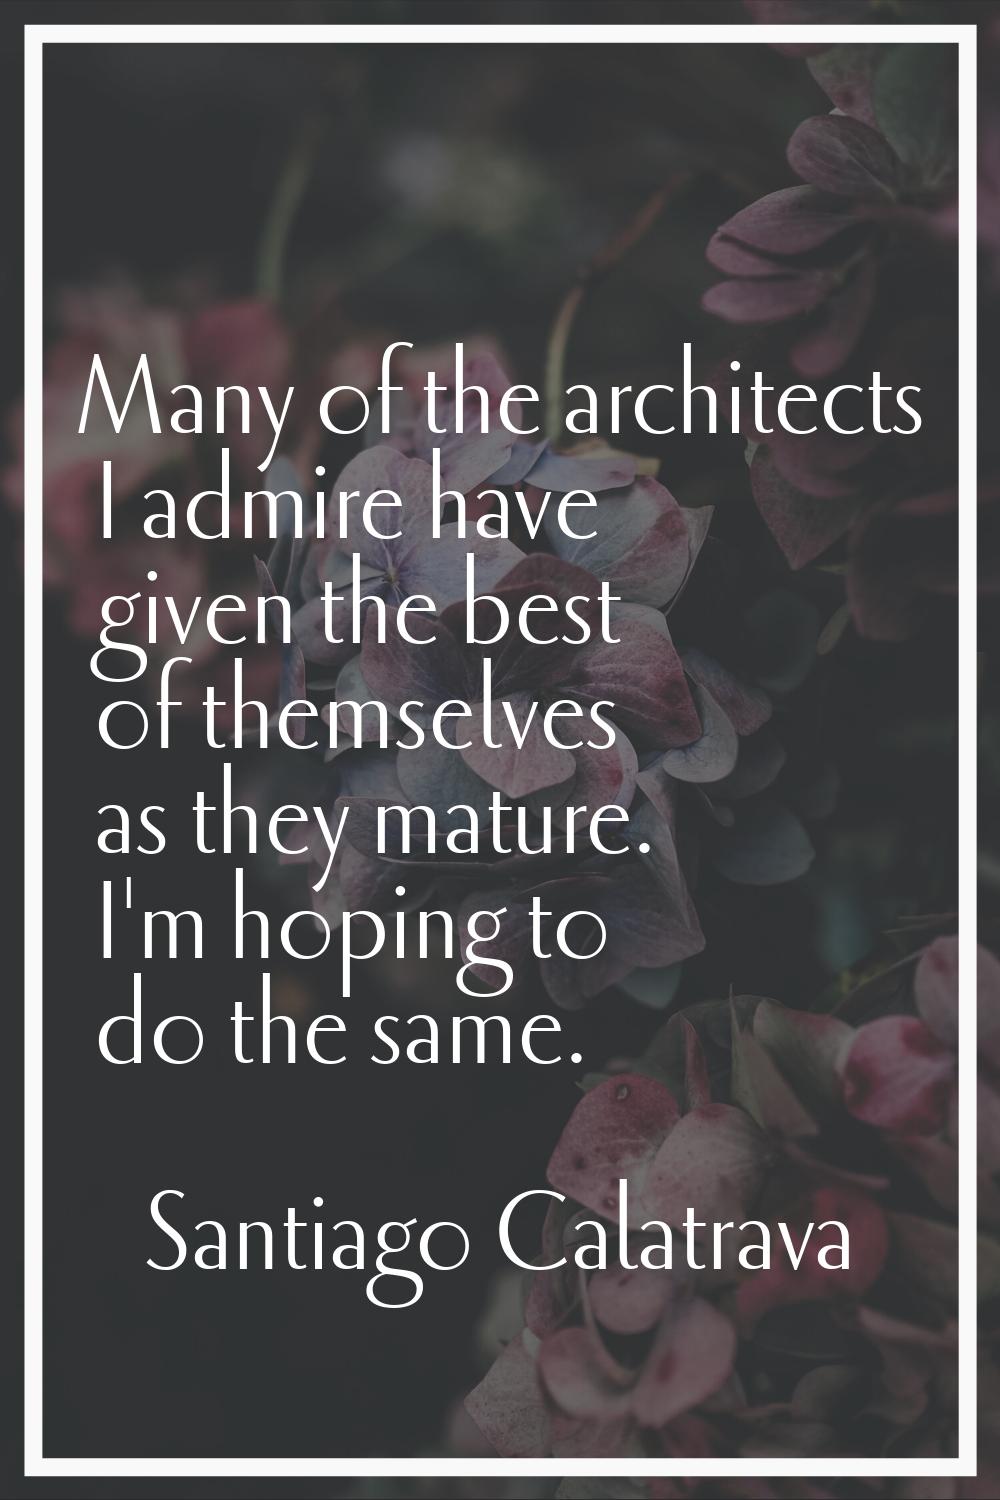 Many of the architects I admire have given the best of themselves as they mature. I'm hoping to do 